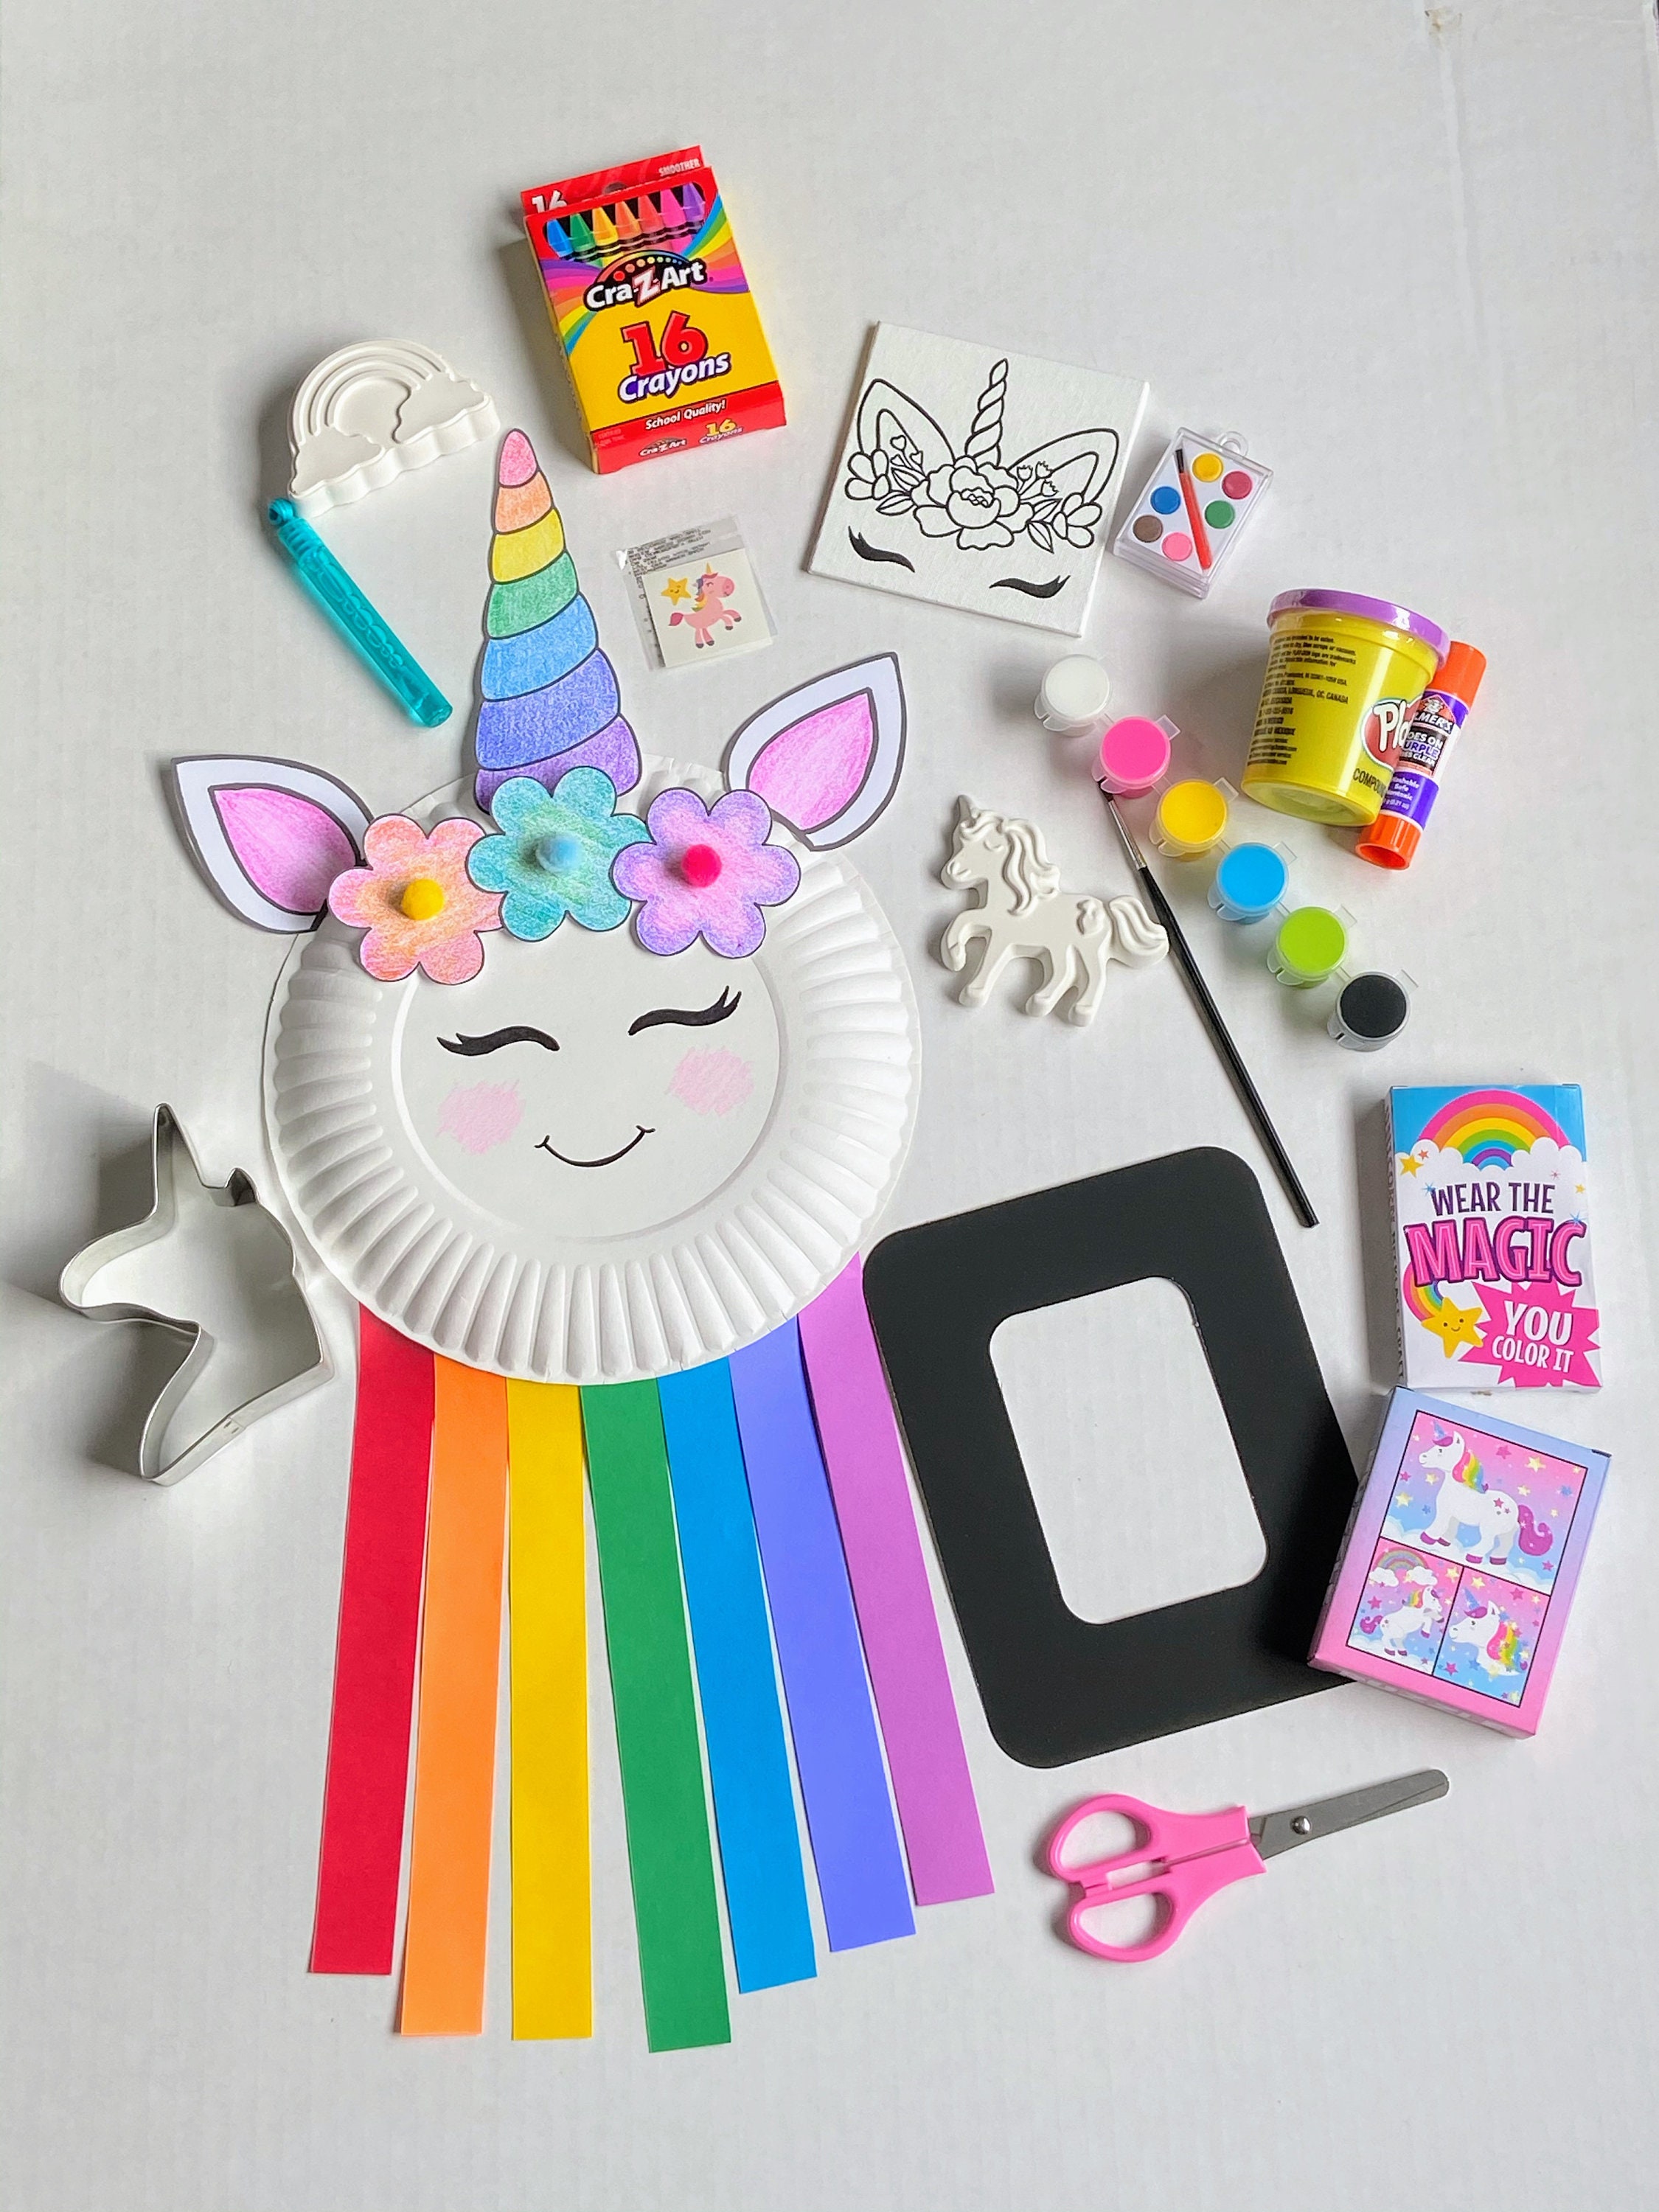 KRAFUN My First Unicorn Bunny Paper Craft Kit for Toddlers and Girls Age 3-8 Years Old, Include 18 Cute DIY Arts and Crafts Projects, Organized Art